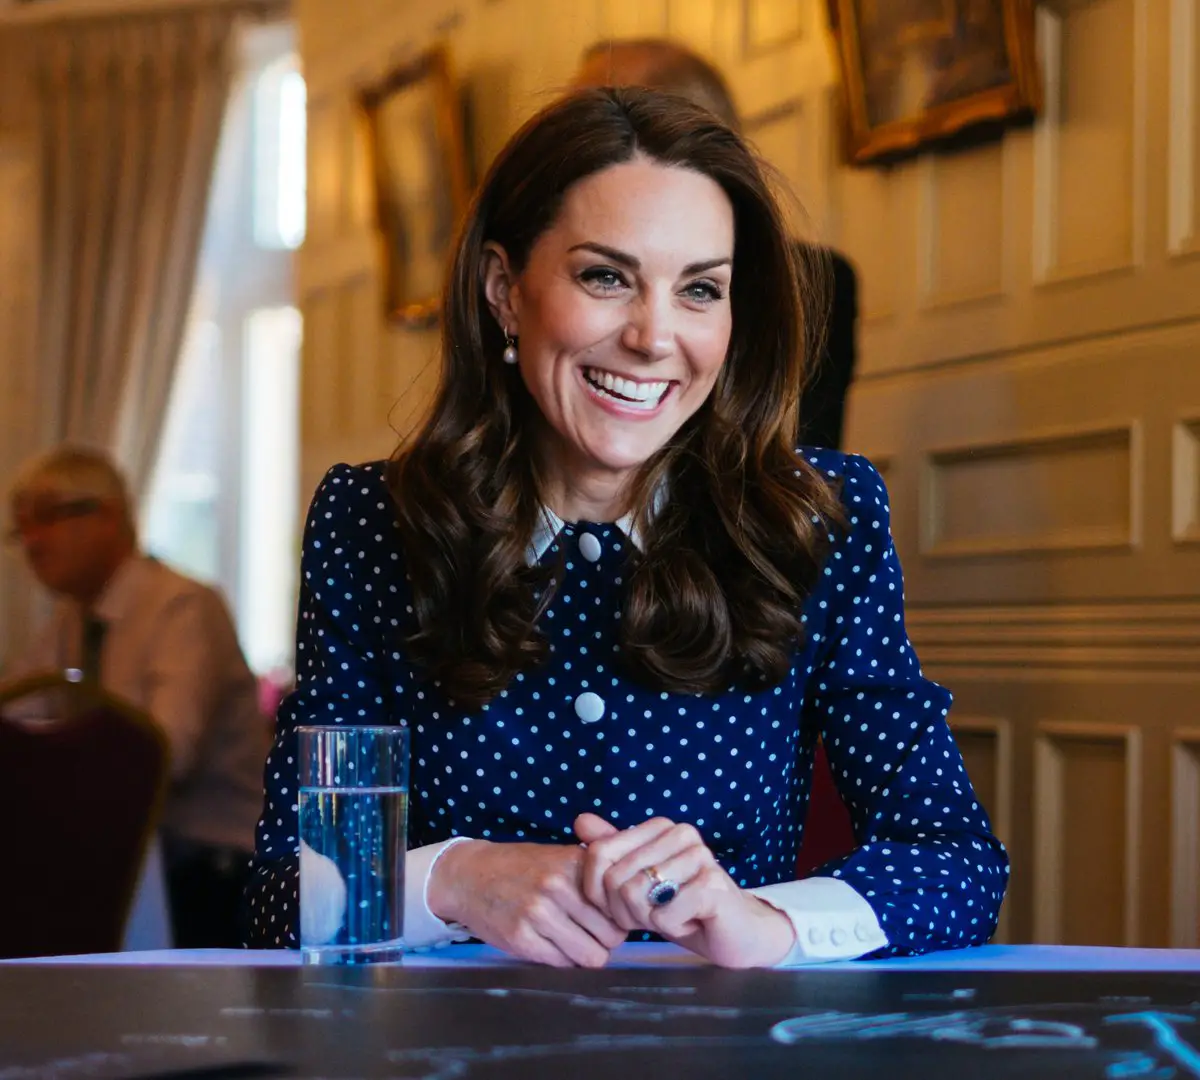 Duchess of Cambridge visited Bletchley Park on D-Day Landing